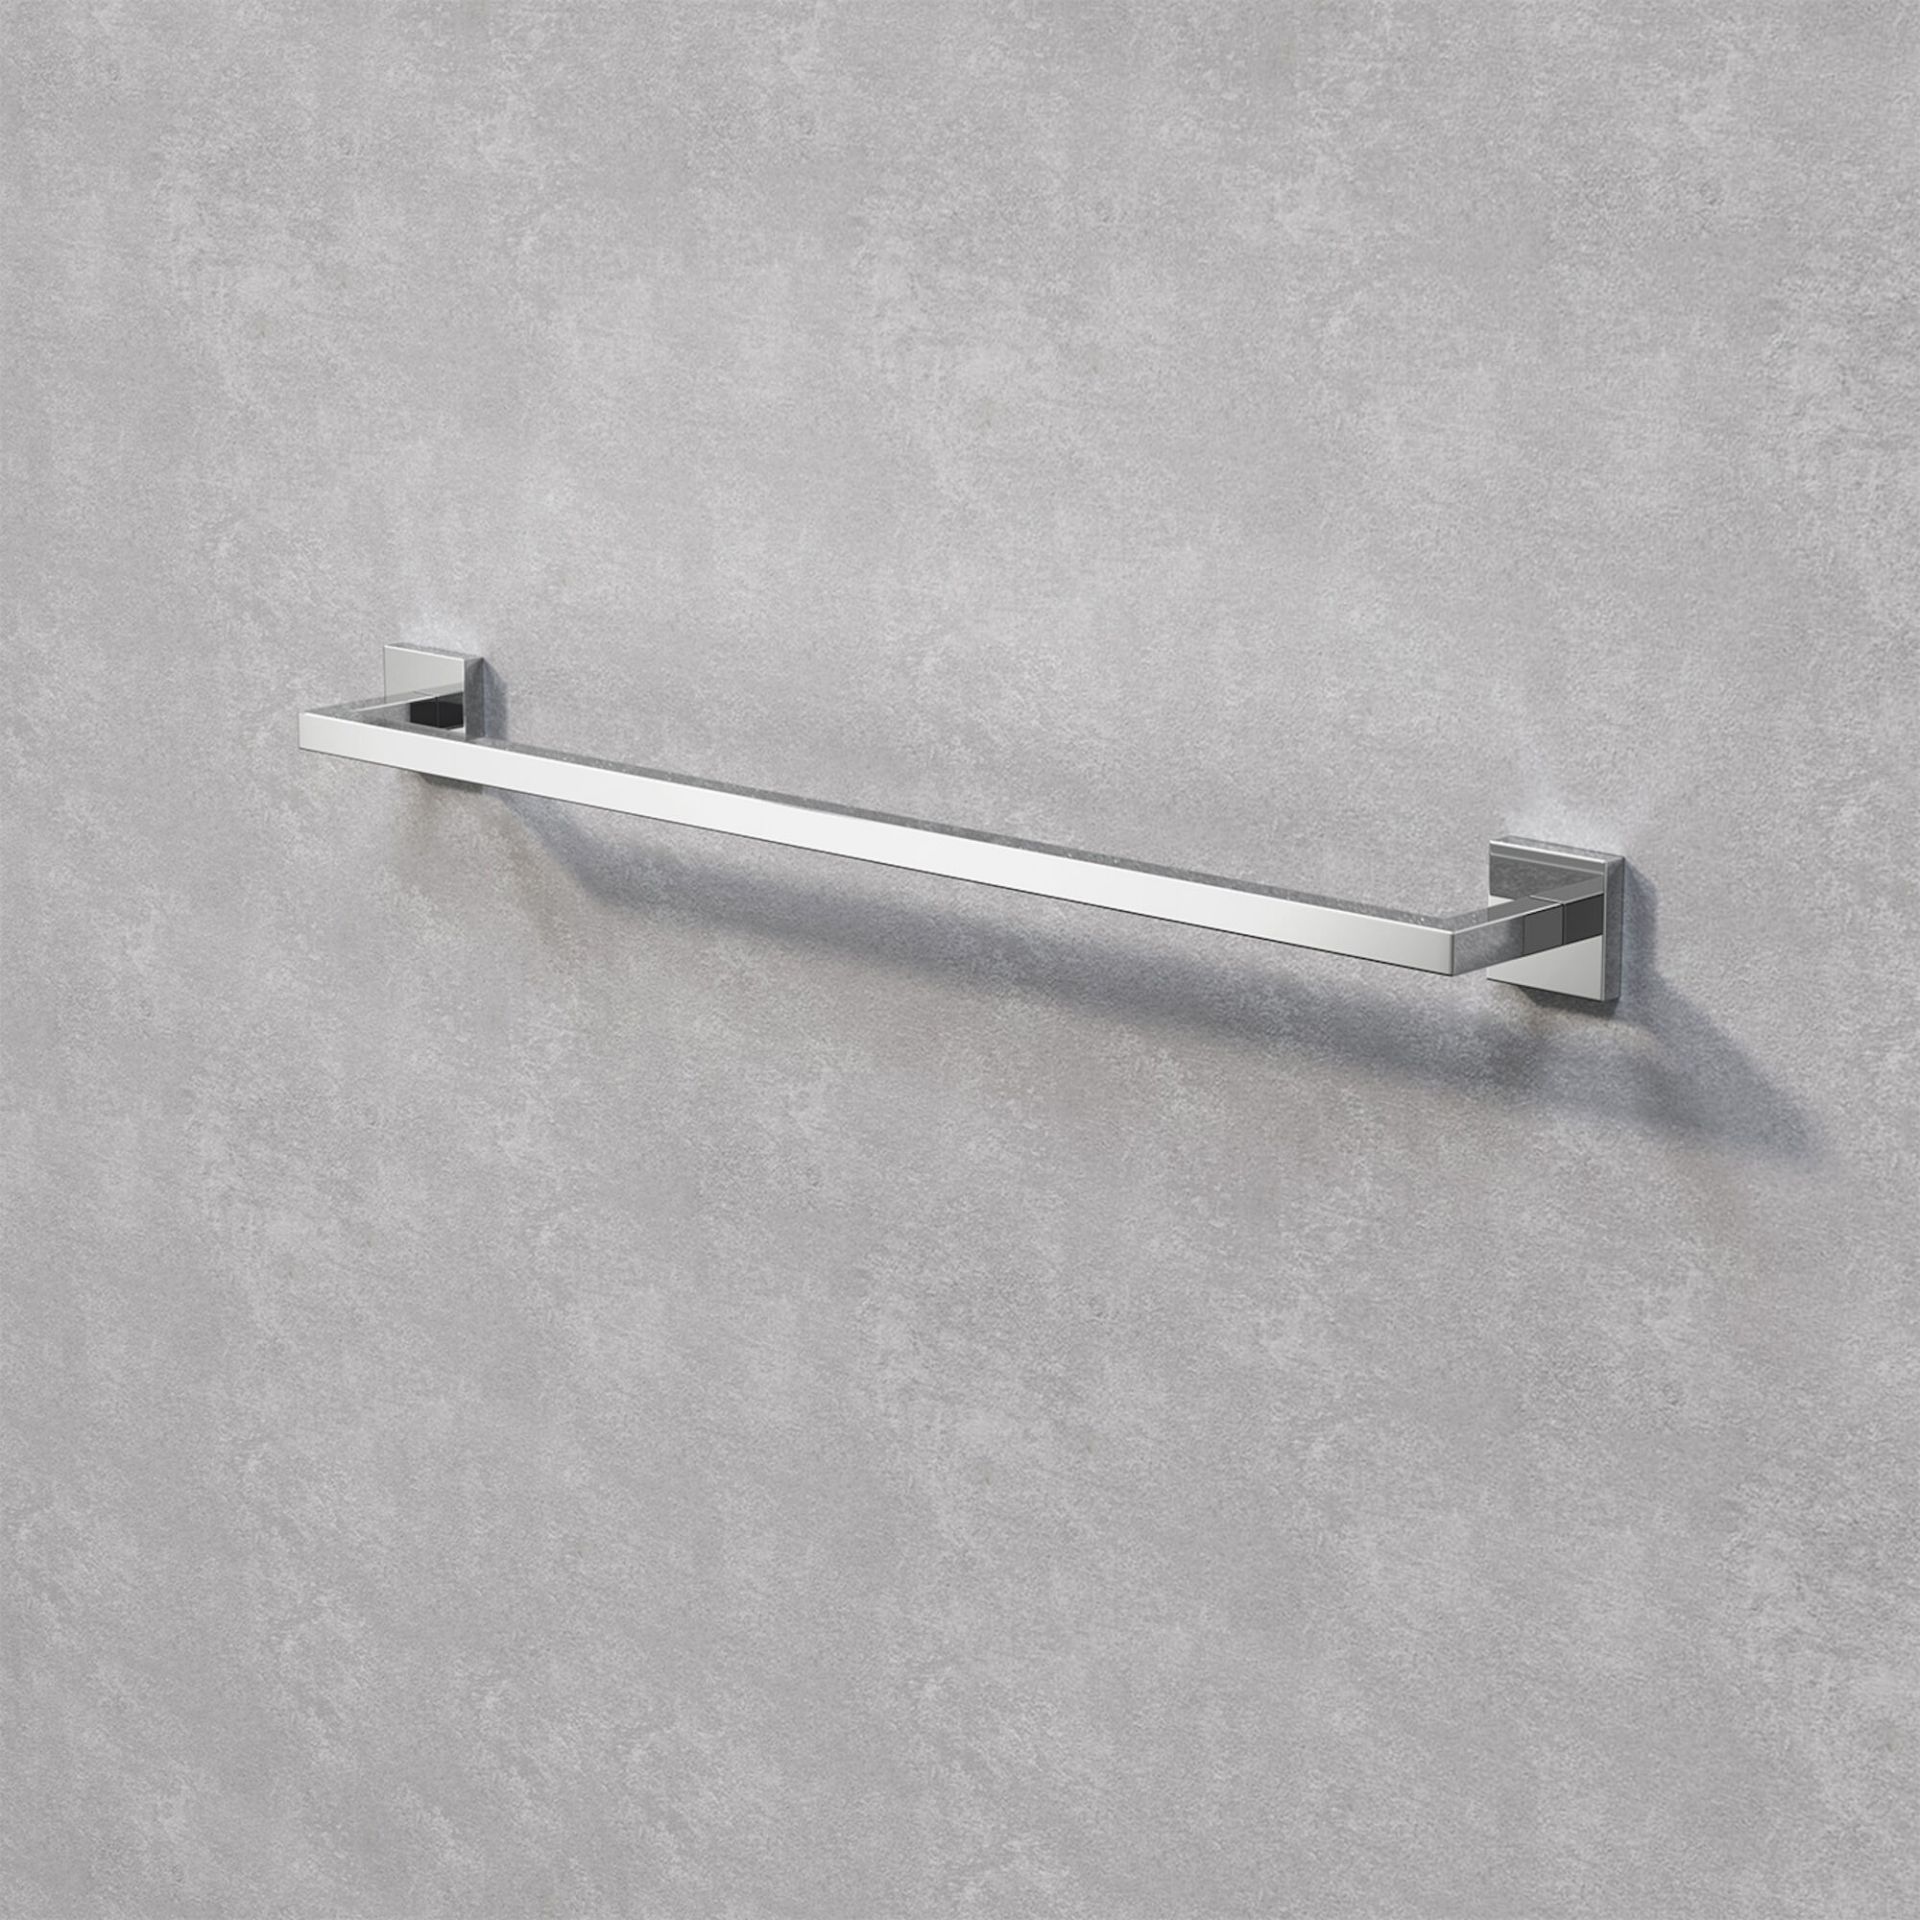 (EE1013) Jesmond Towel Rail Finishes your bathroom with a little extra functionality and style...